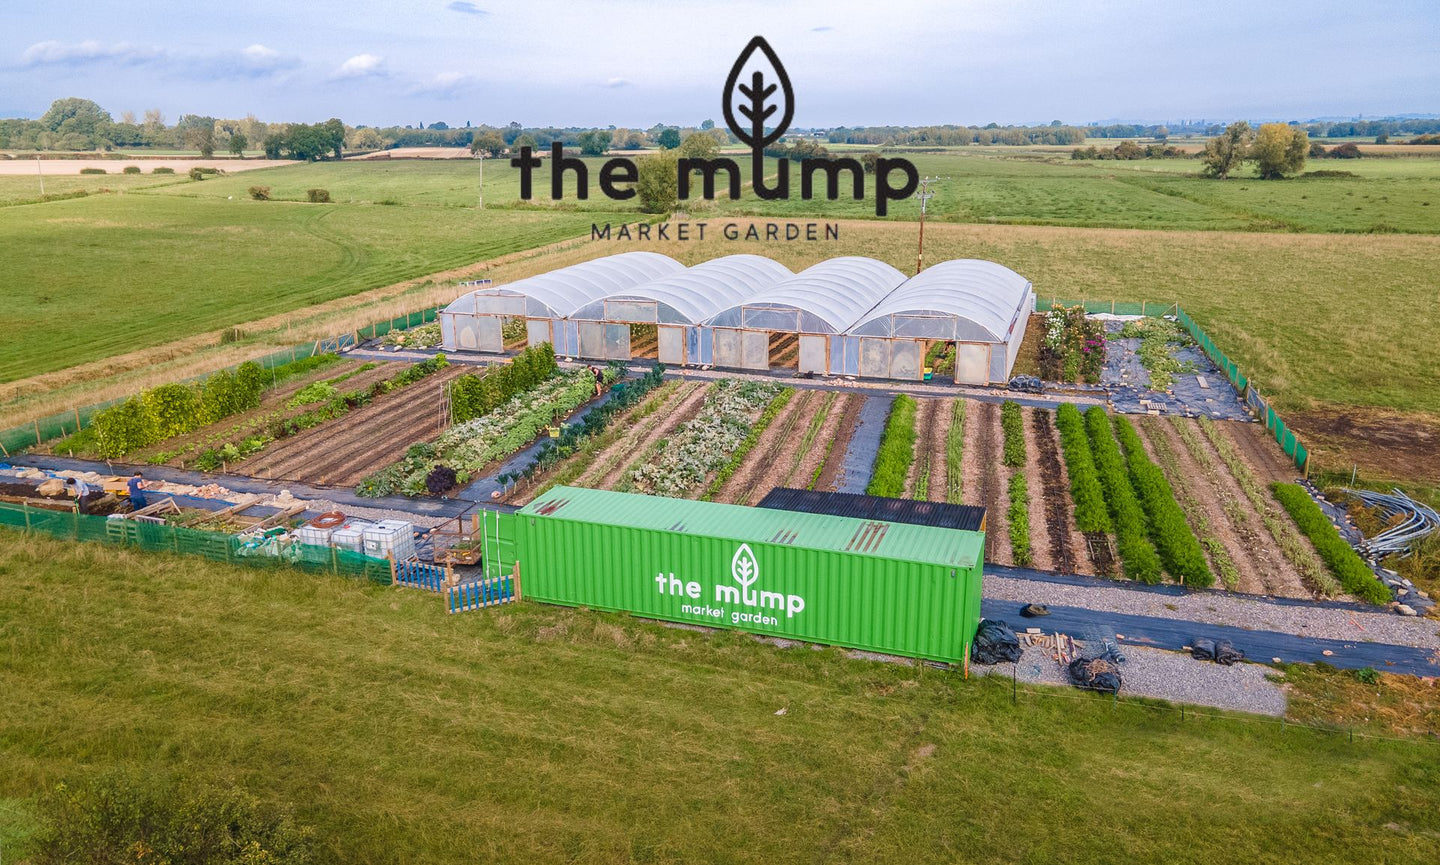 The Mump Market Gardens  Veg Box Delivered Weekly To The Local Area.